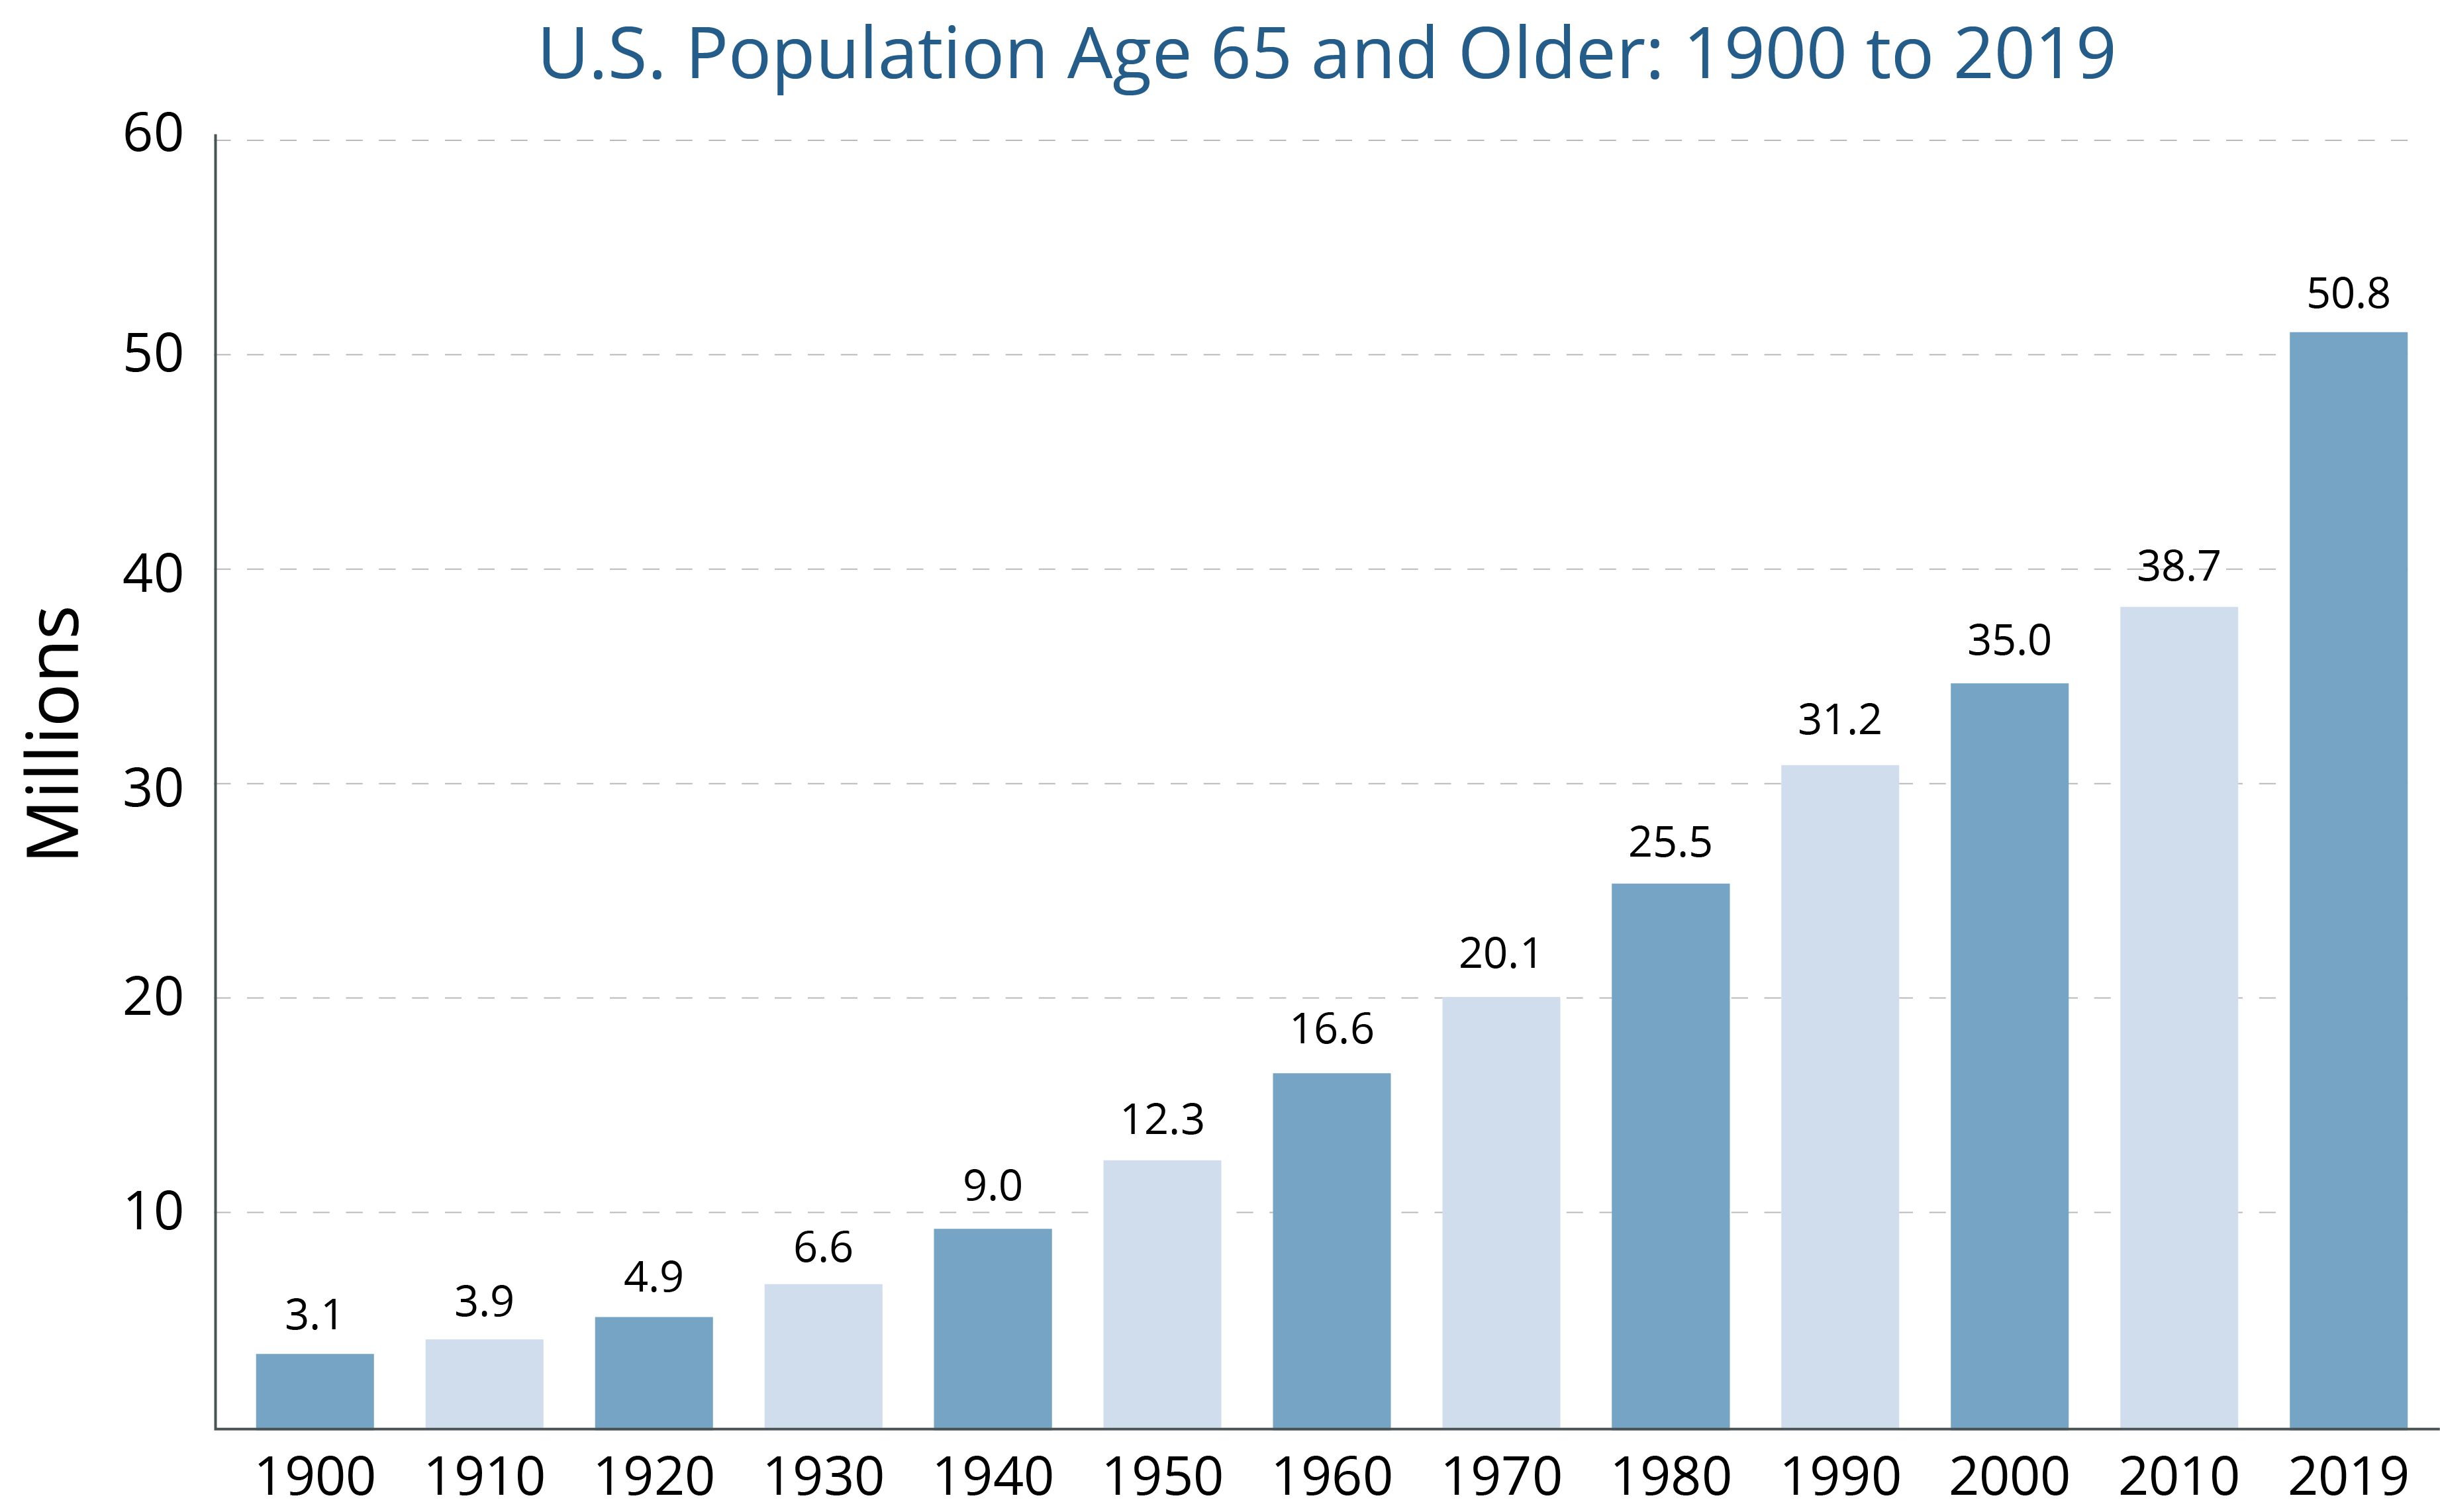 Bar graph representing U.S. Population Age 65 and Older: 1900 to 2019